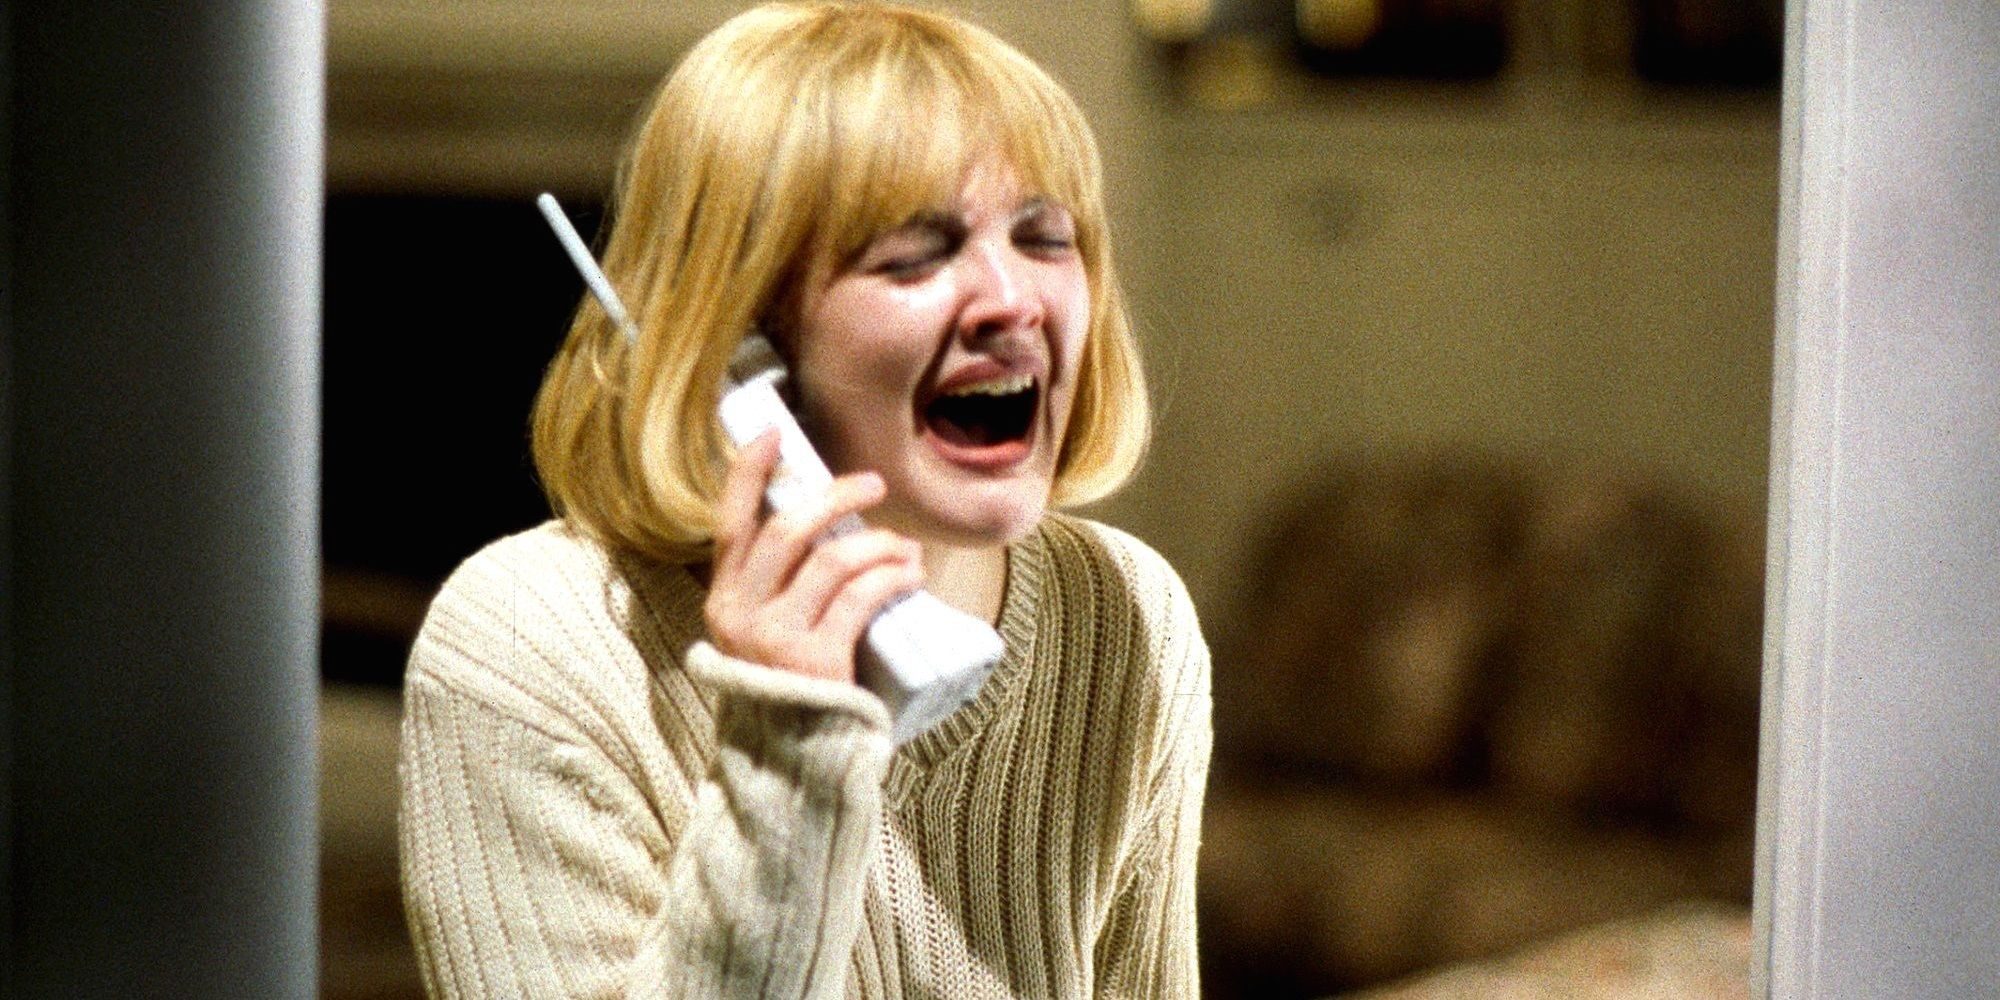 drew-barrymore-as-casey-on-the-phone-in-scream-4577911